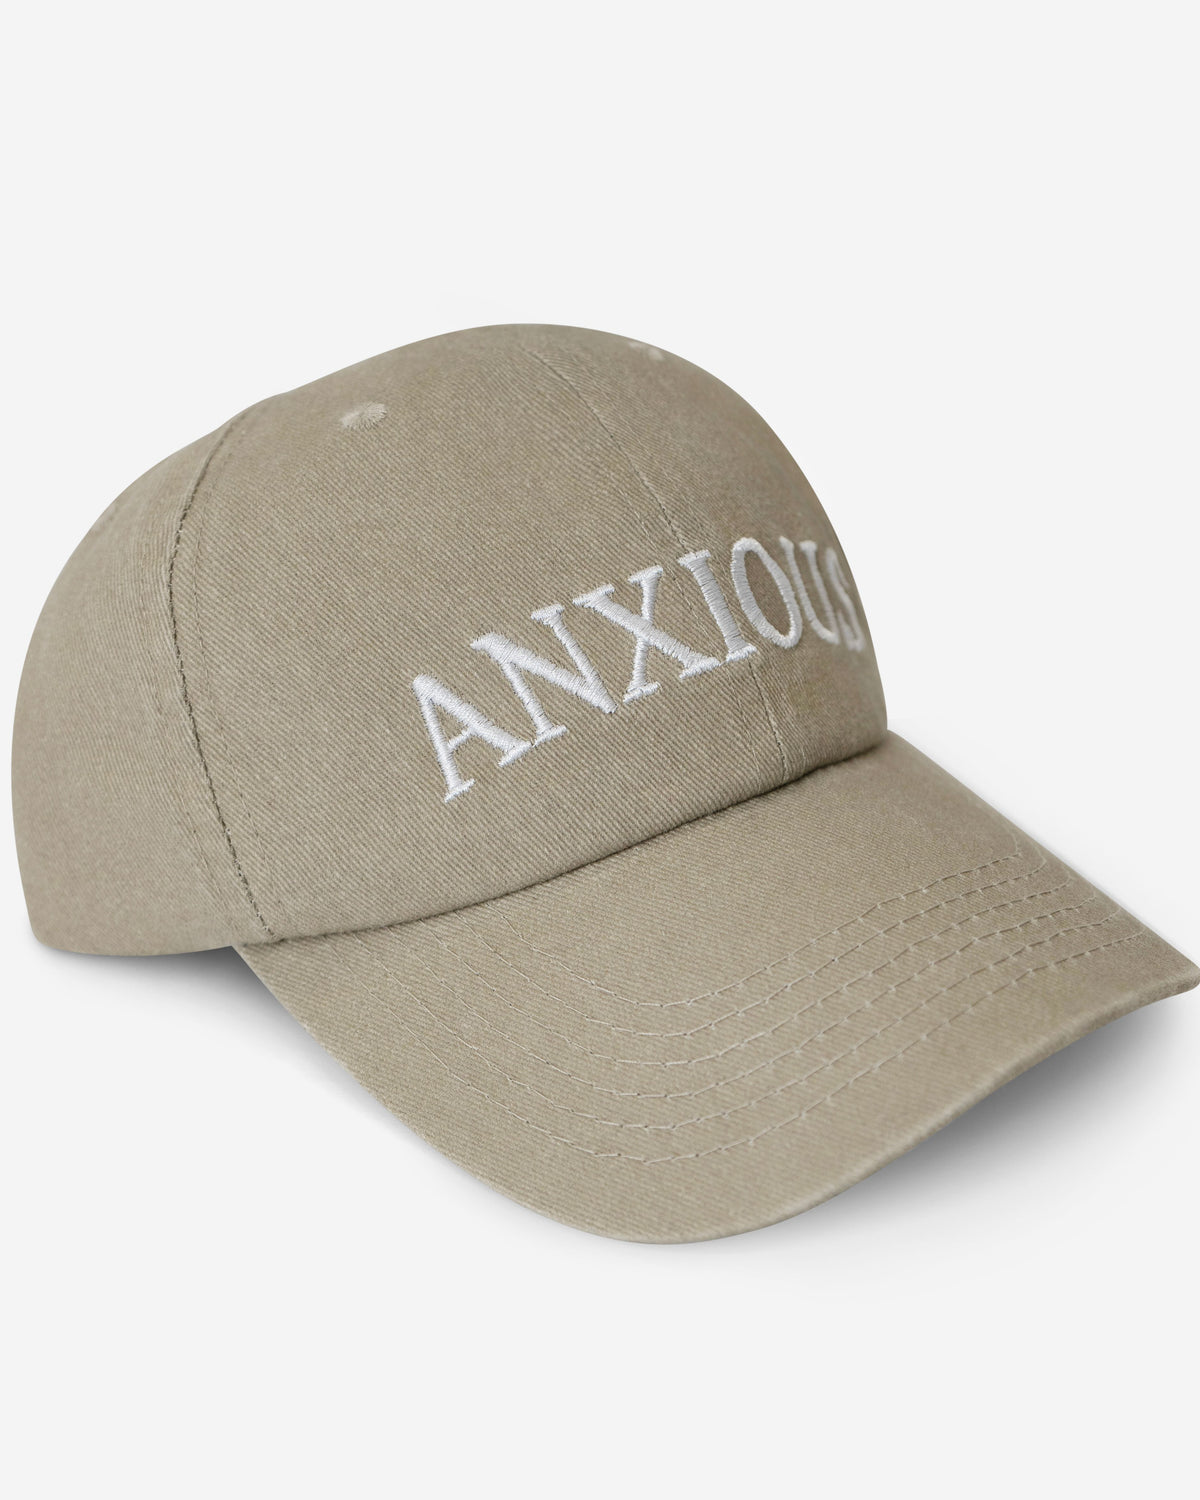 Anxious (this too shall pass) Hat